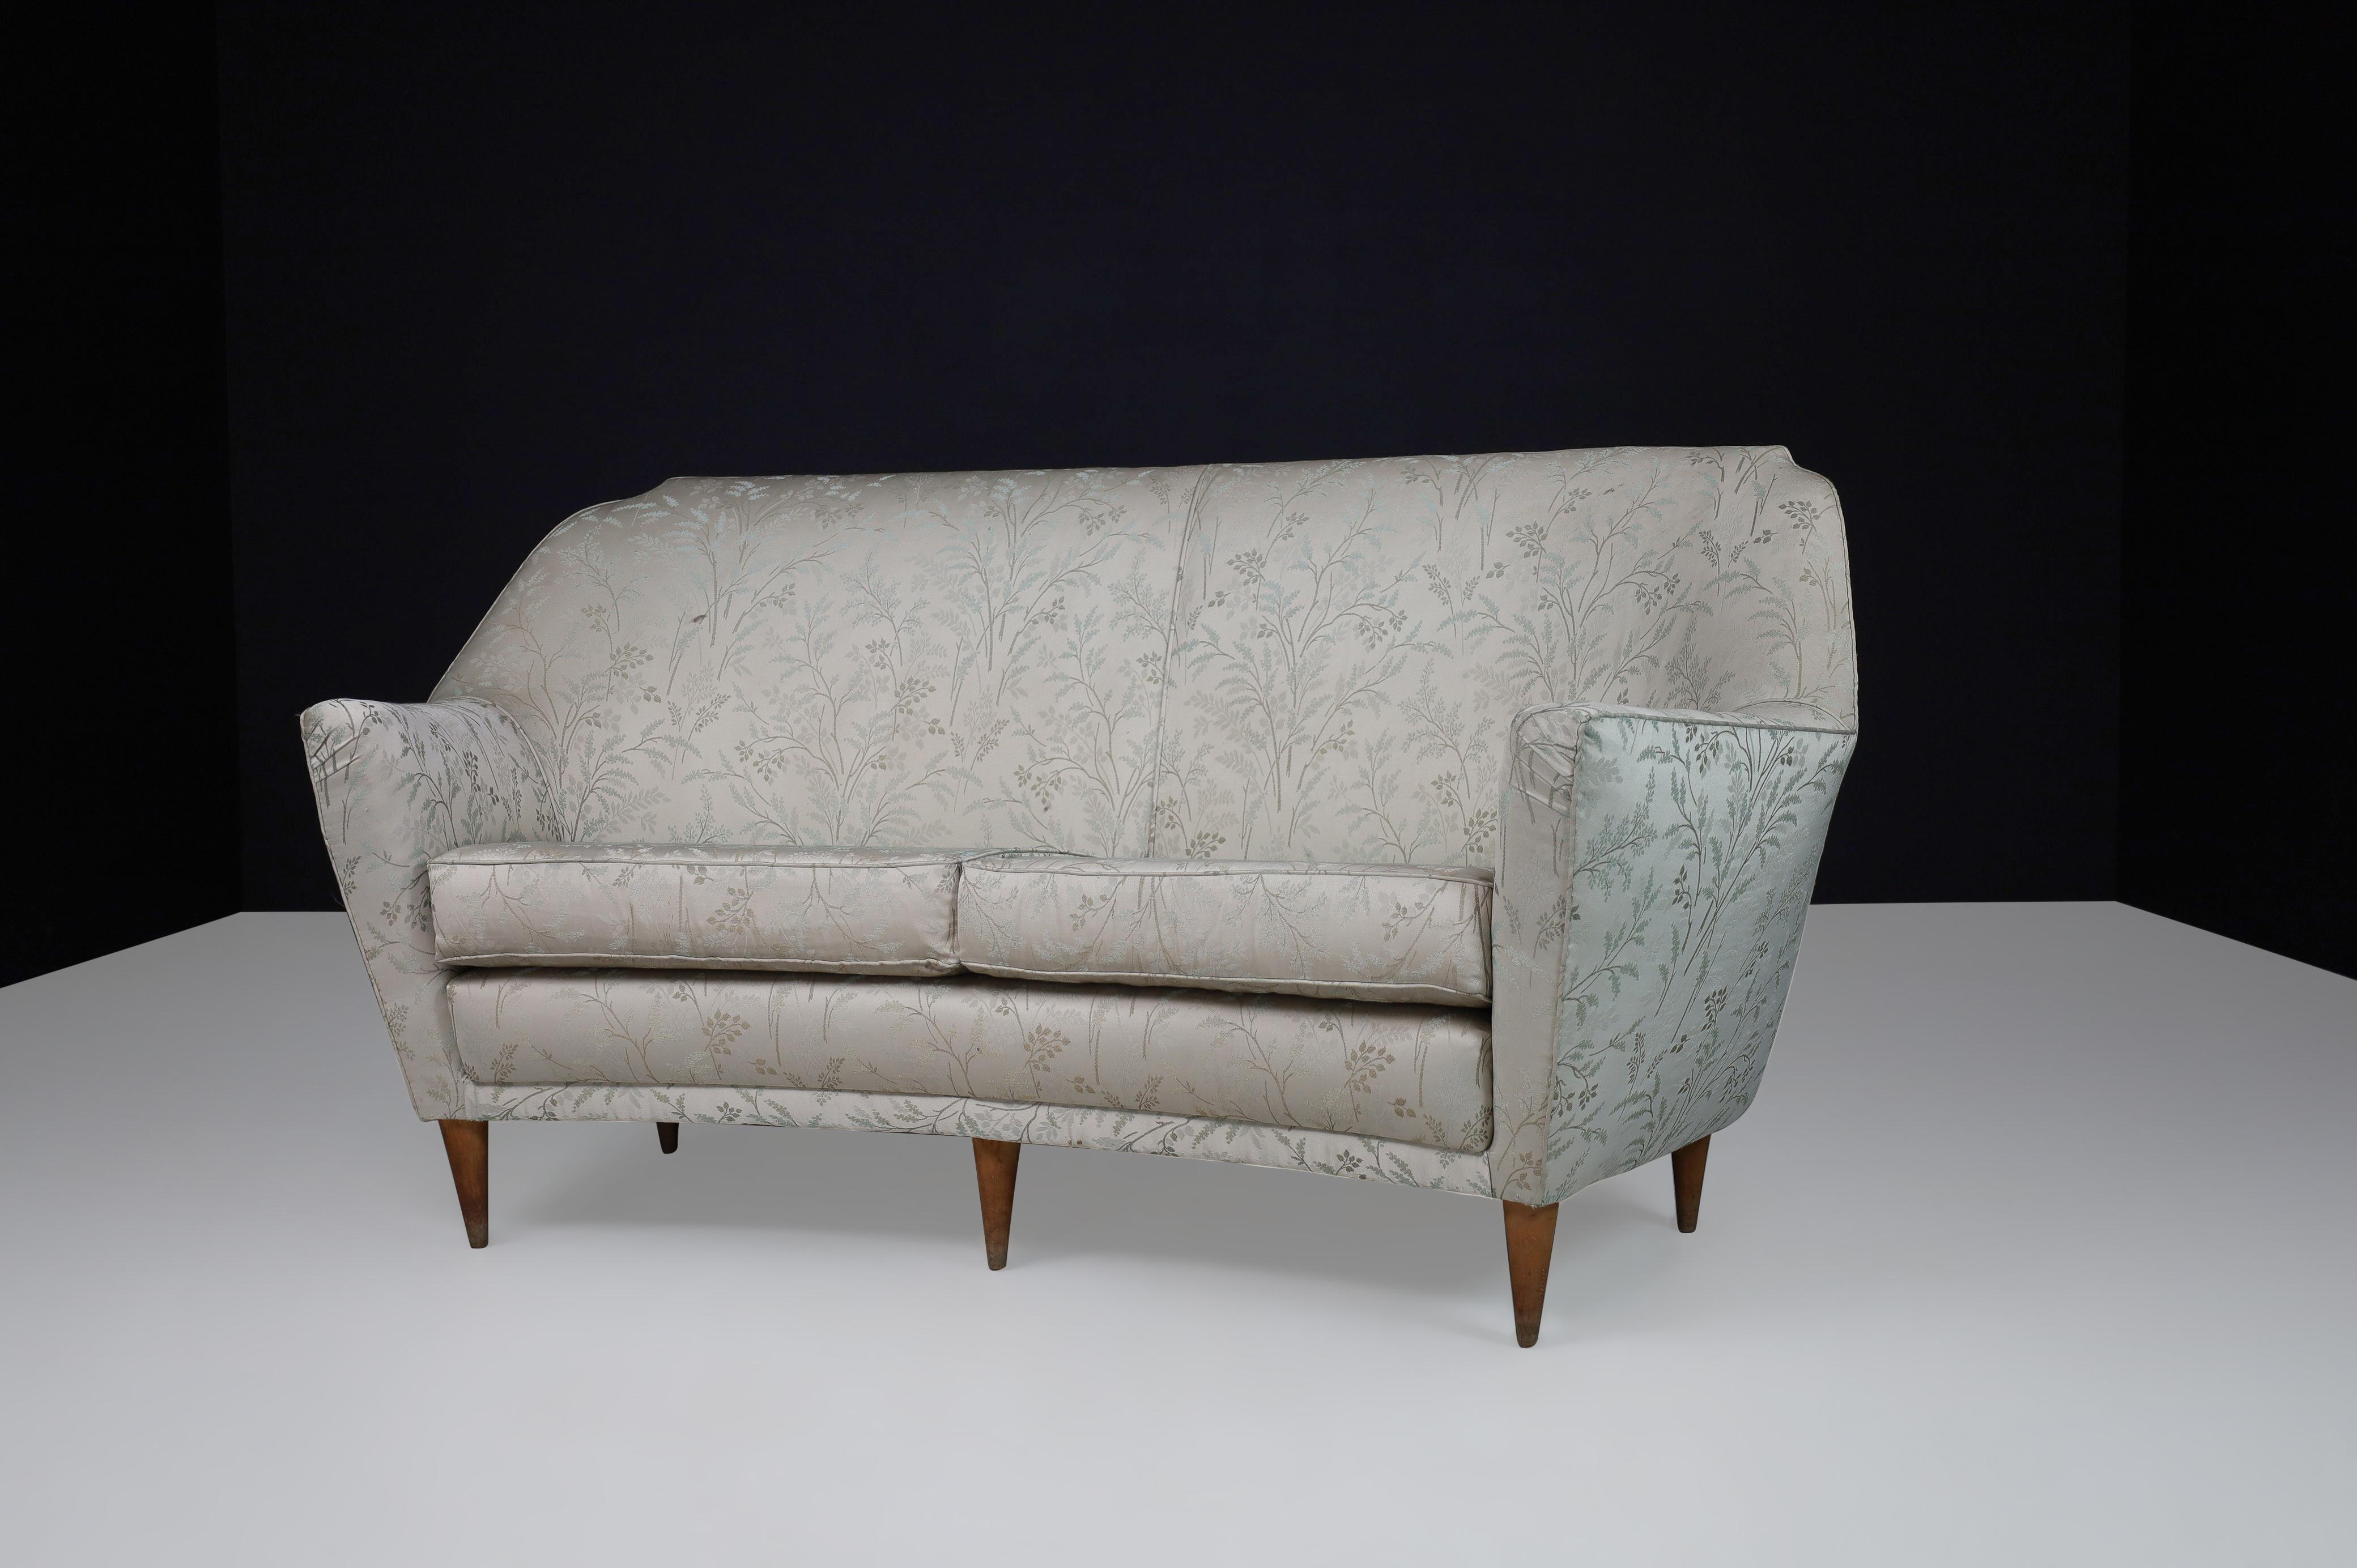 Ico Parisi Sofa in Leaf Motif Fabric and Tapered Wooden Legs, Italy, 1950s For Sale 3